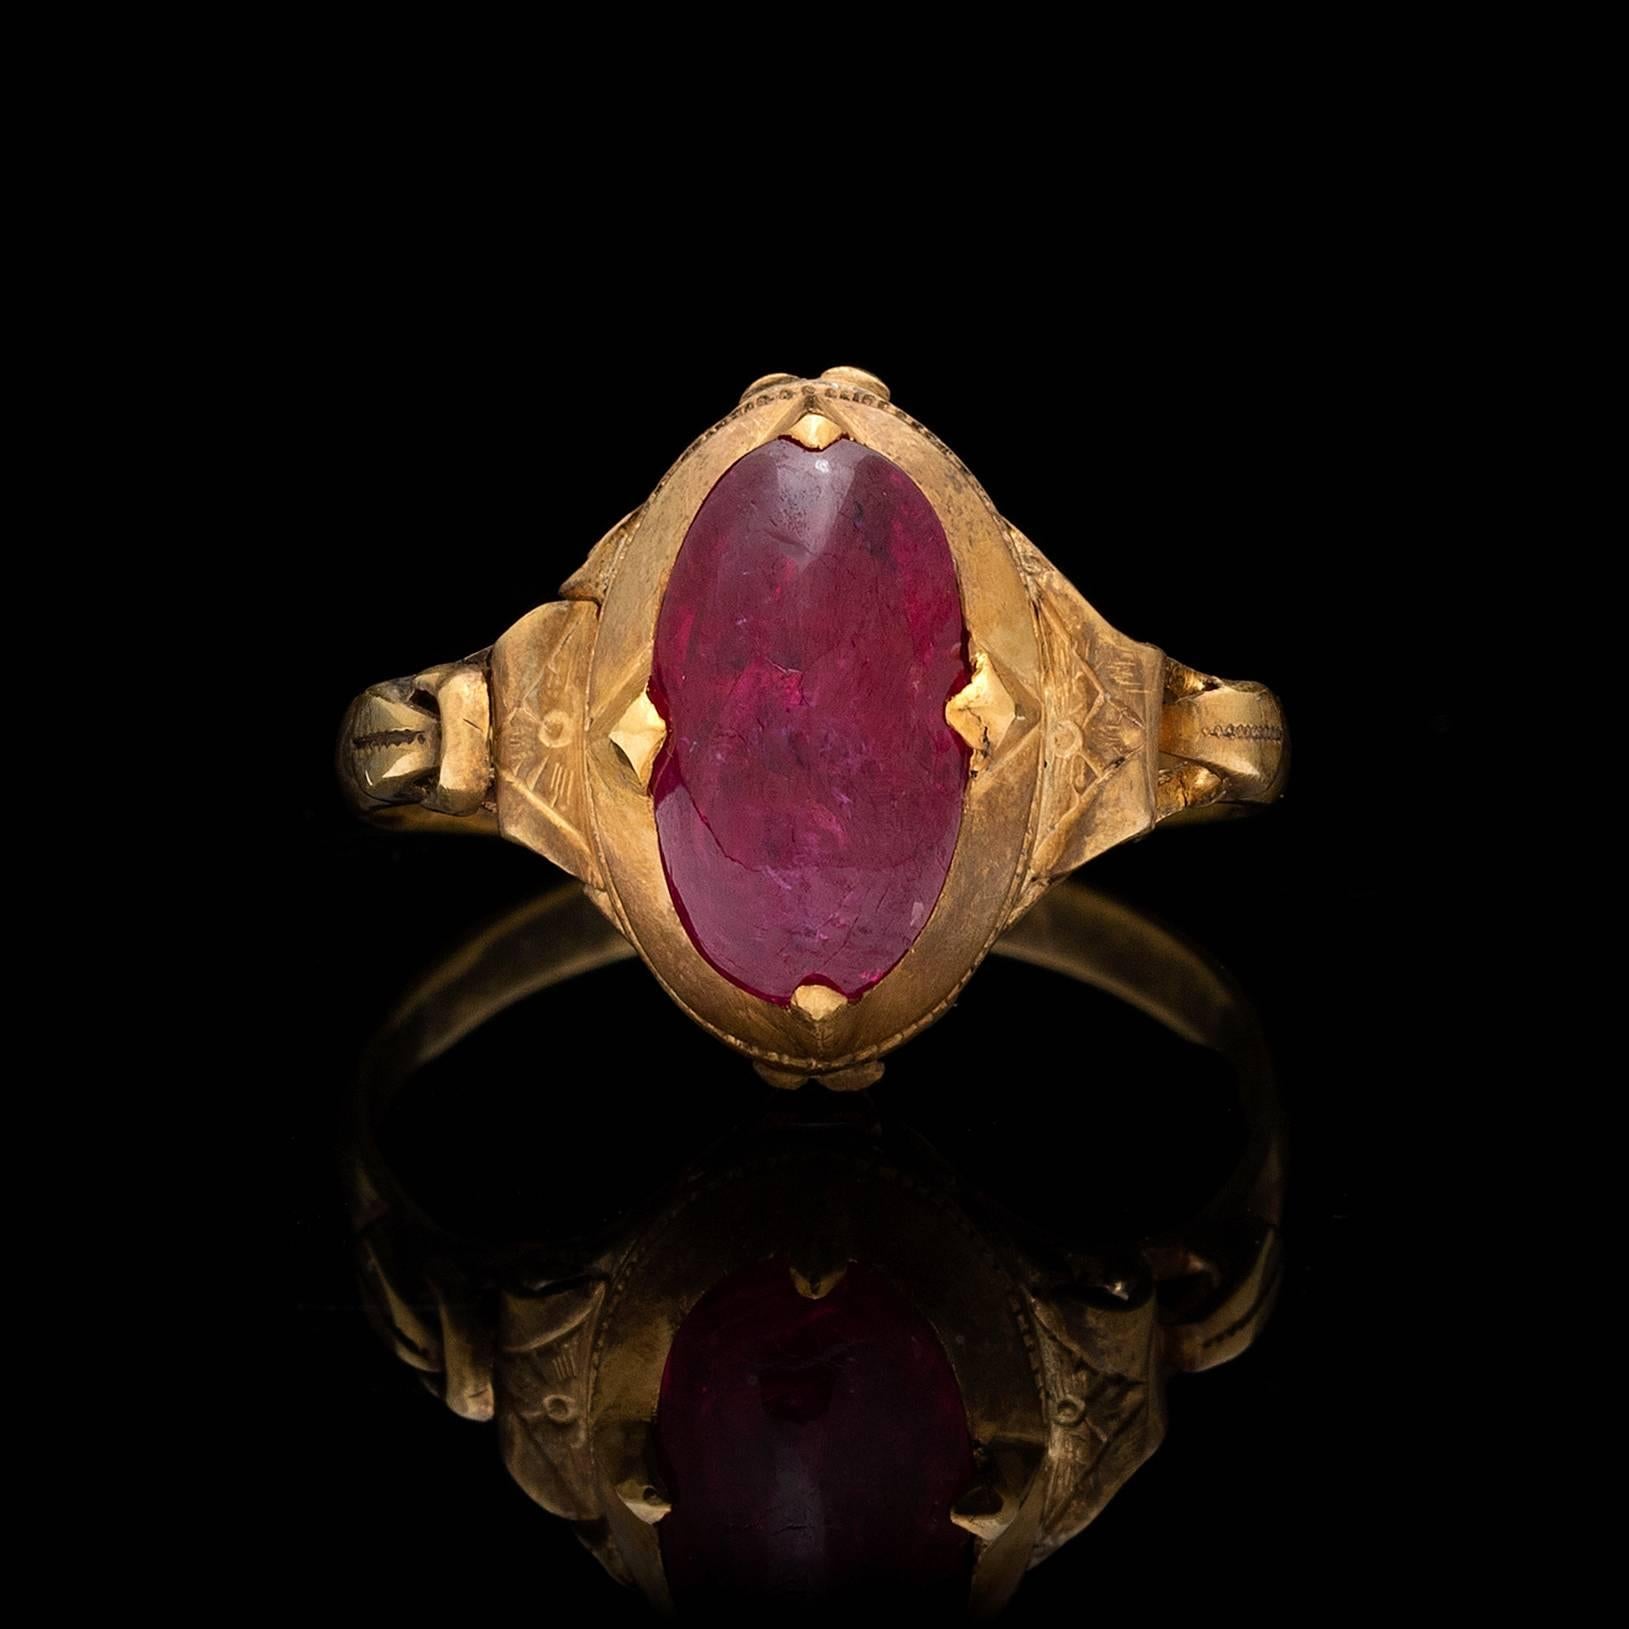 Vintage 14k yellow gold ring features a 2.18 carat cabochon unheated ruby measuring approximately 11.0 x 6.5mm. This unheated ruby is accompanied by a report # given as a lot, # 6152901185. Ring size is a 6.5 and can be resized. Total weight of the